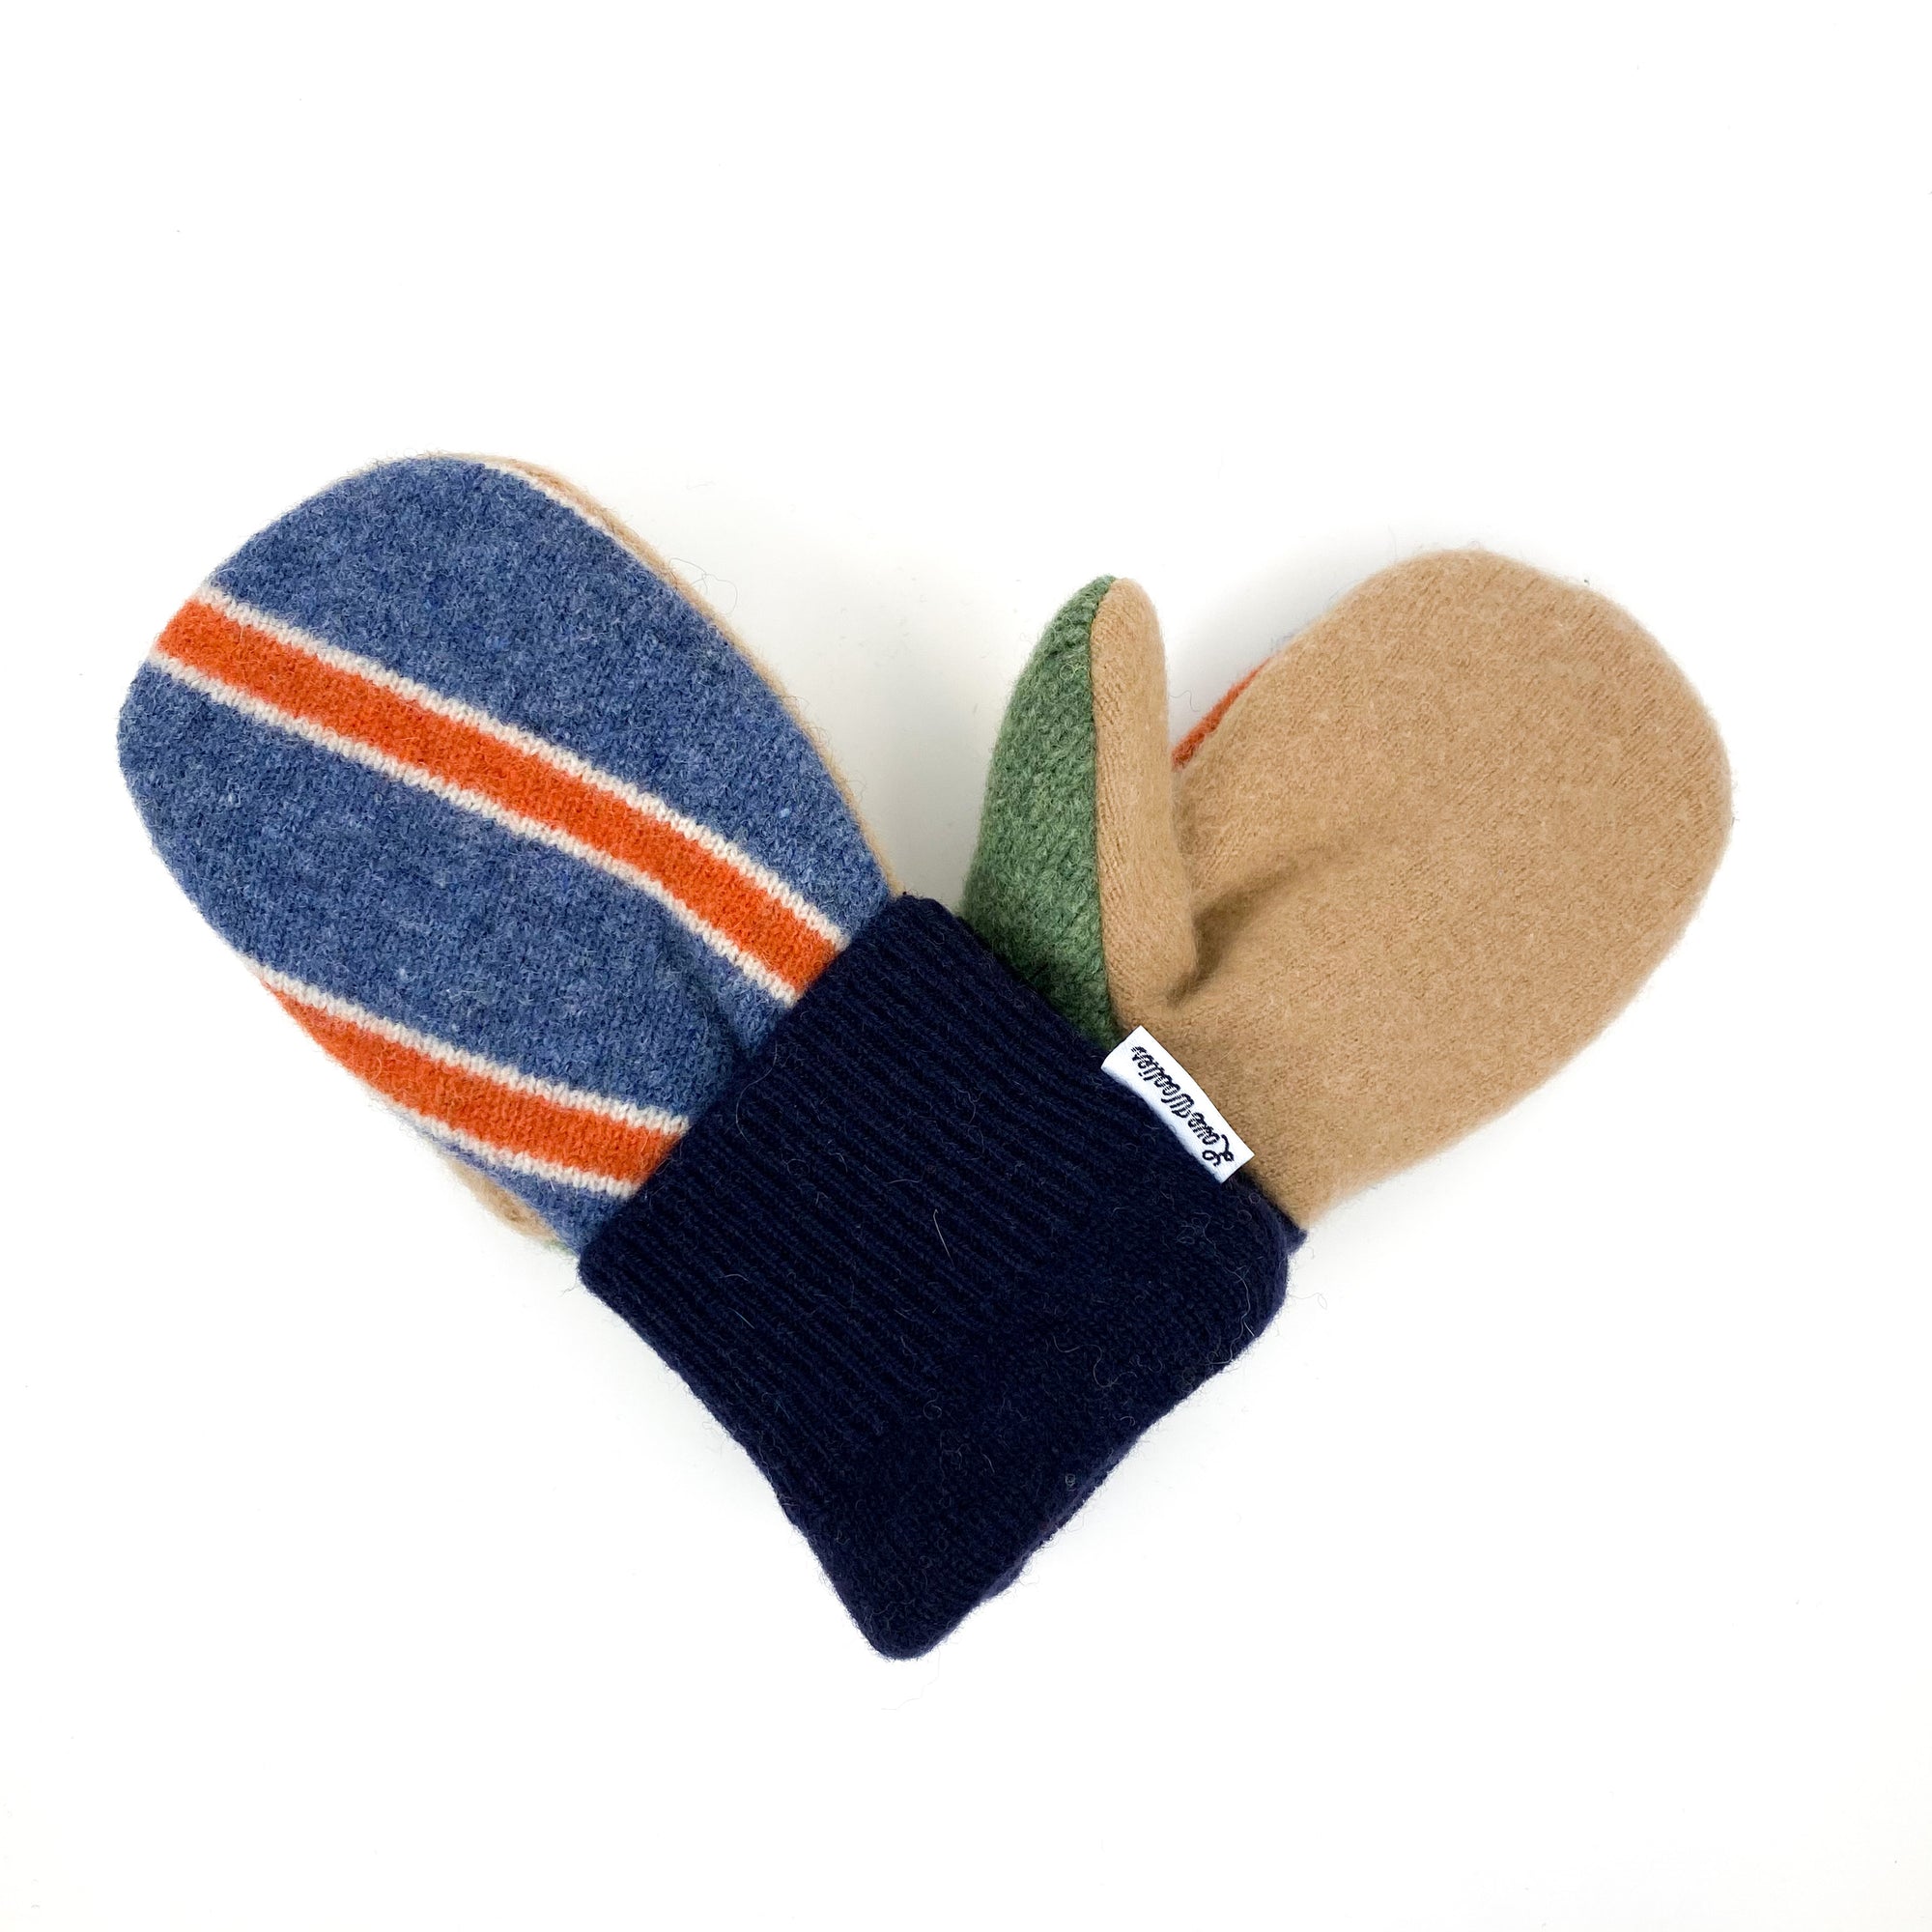 Large Kid's Wool Sweater Mittens | Warm Day